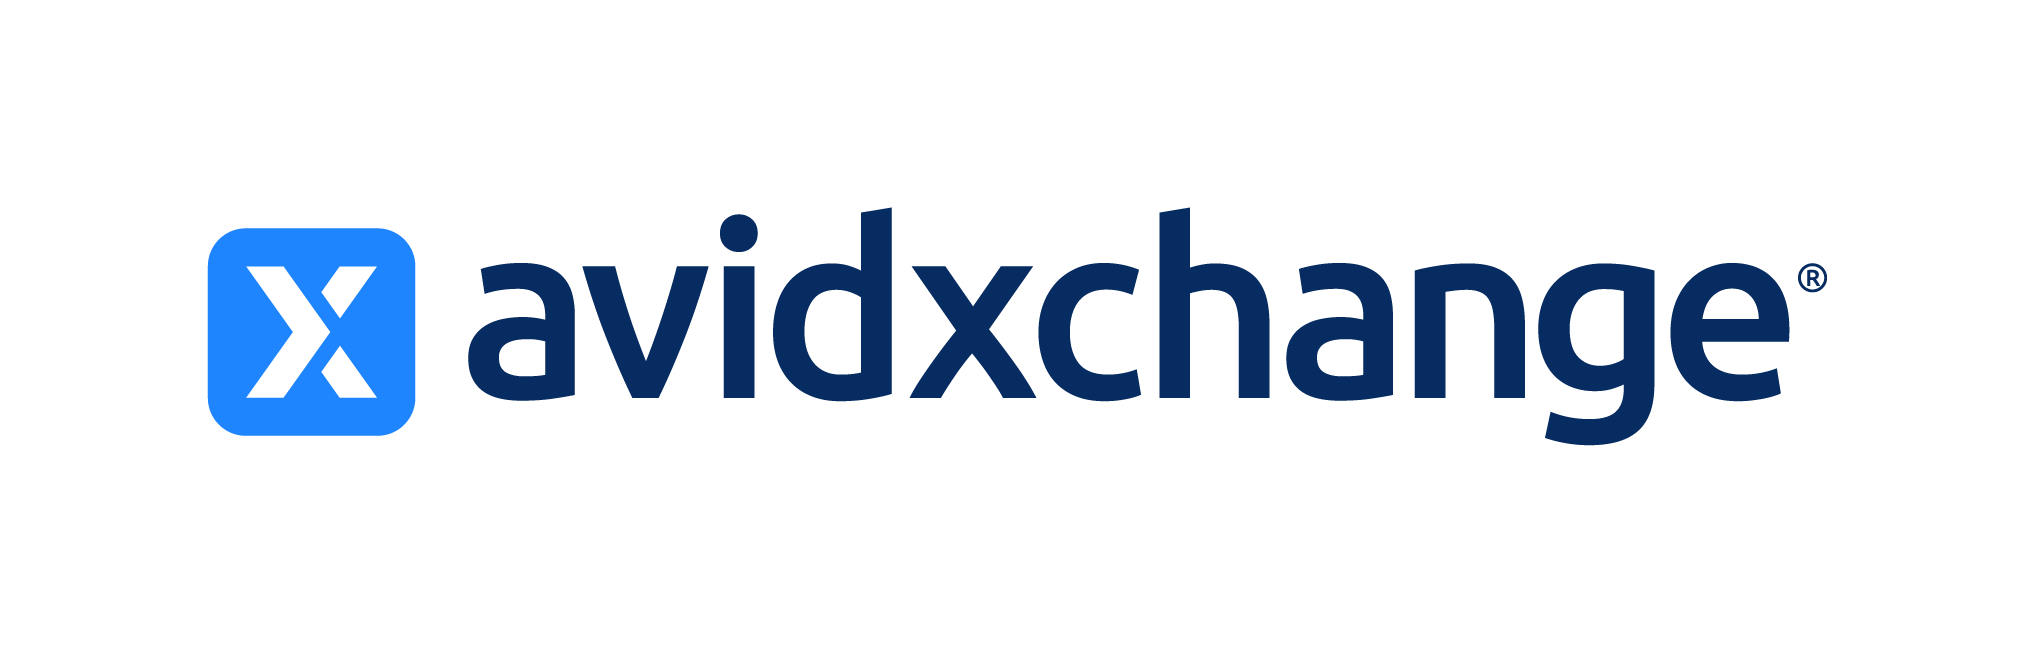 AvidXchange logo with a white "X" against a blue background to the left of the text.